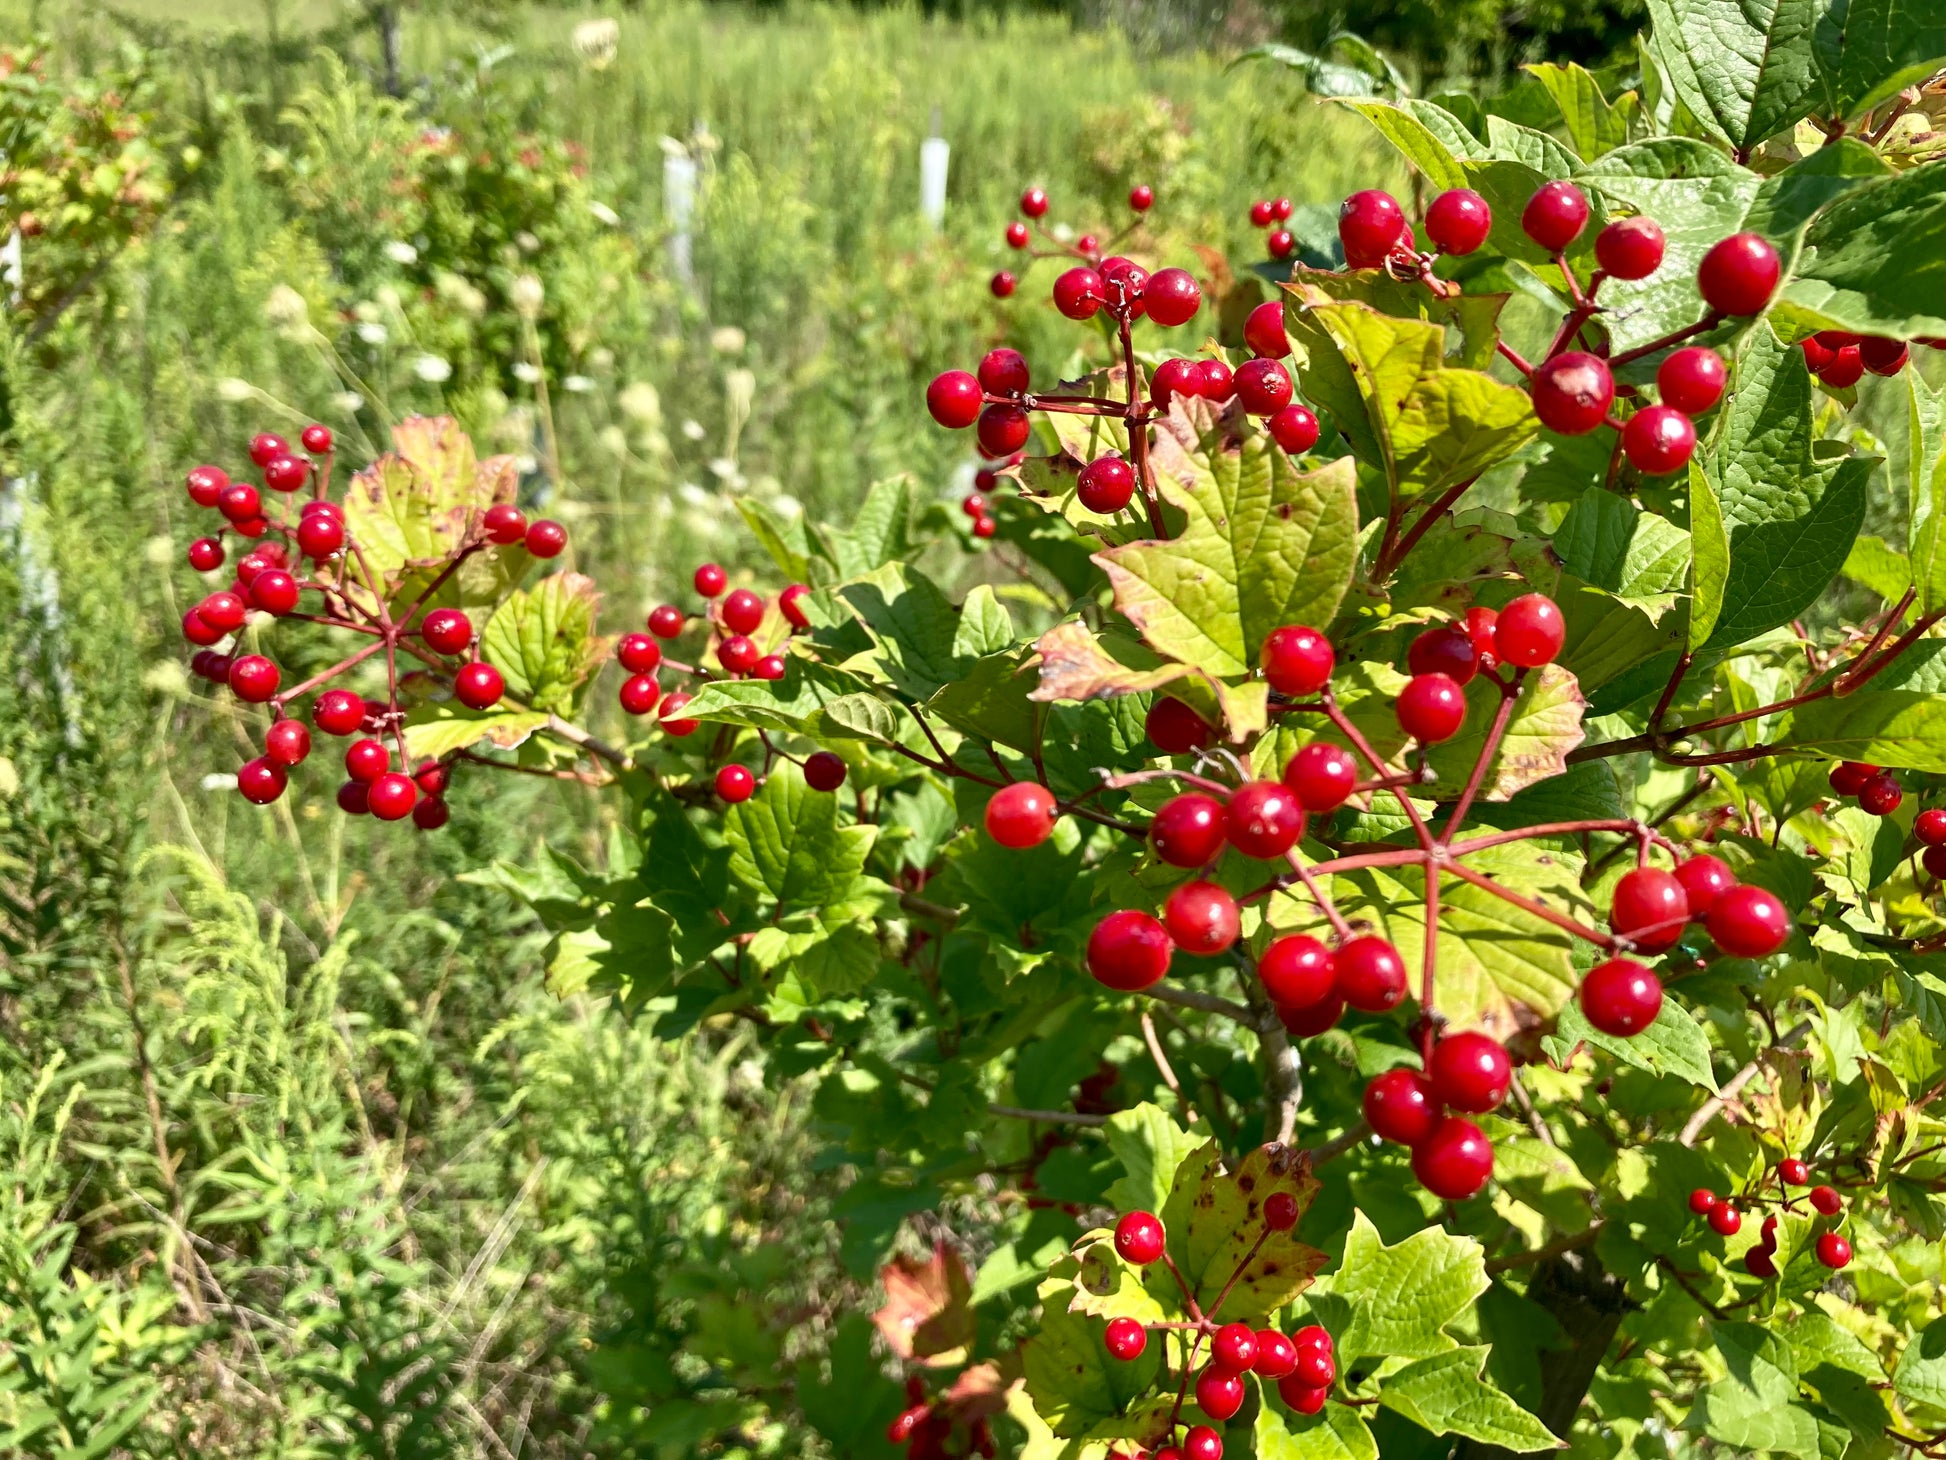 This is the fruit of a American Highbush Cranberry shrub. This Highbush Cranberry is in it's 3rd year of life. This photo was taken in late August.